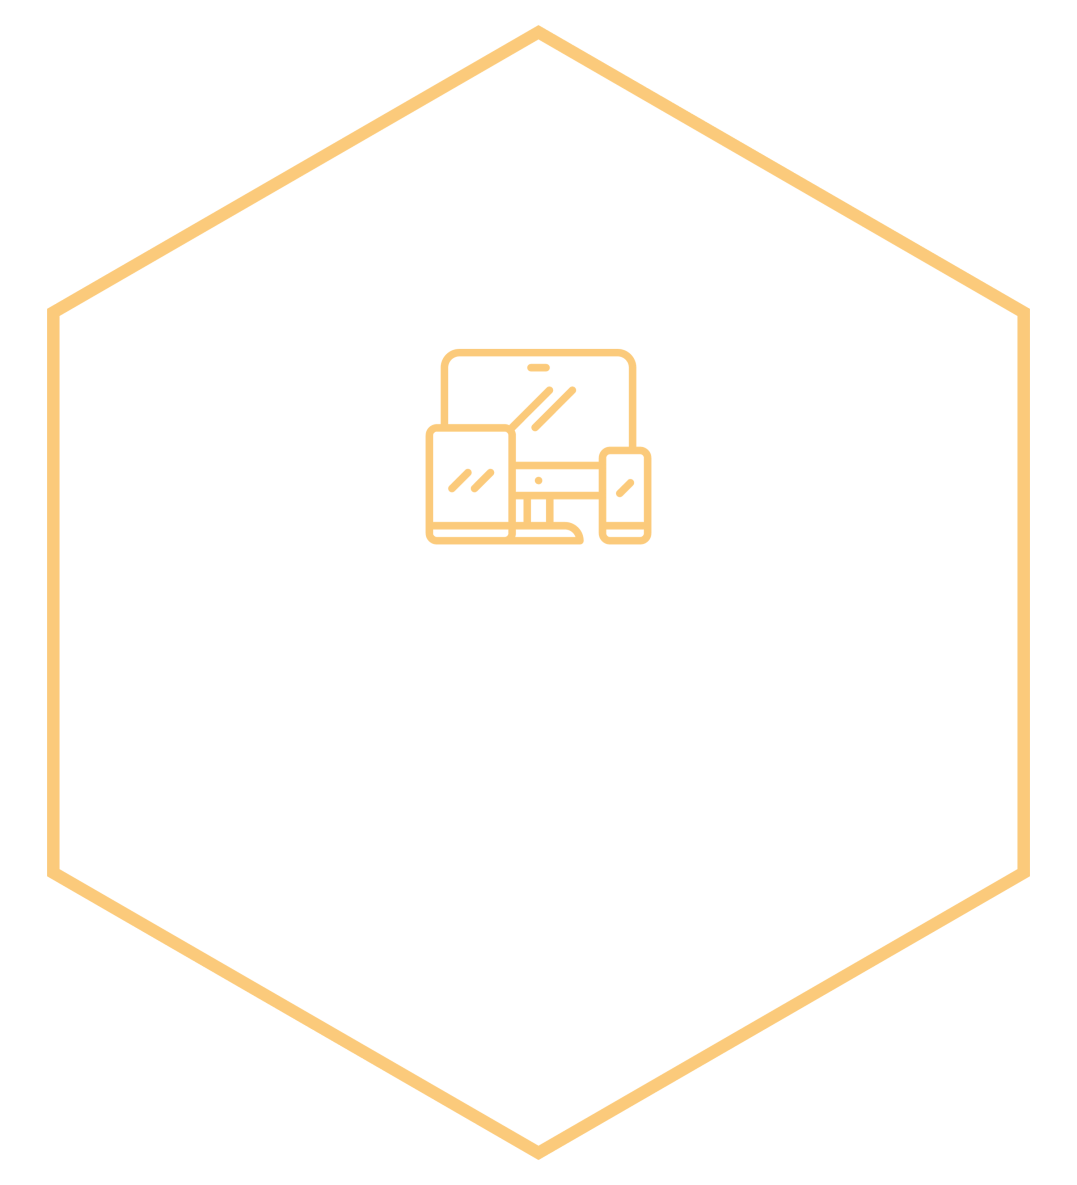 Technical Systems Integration